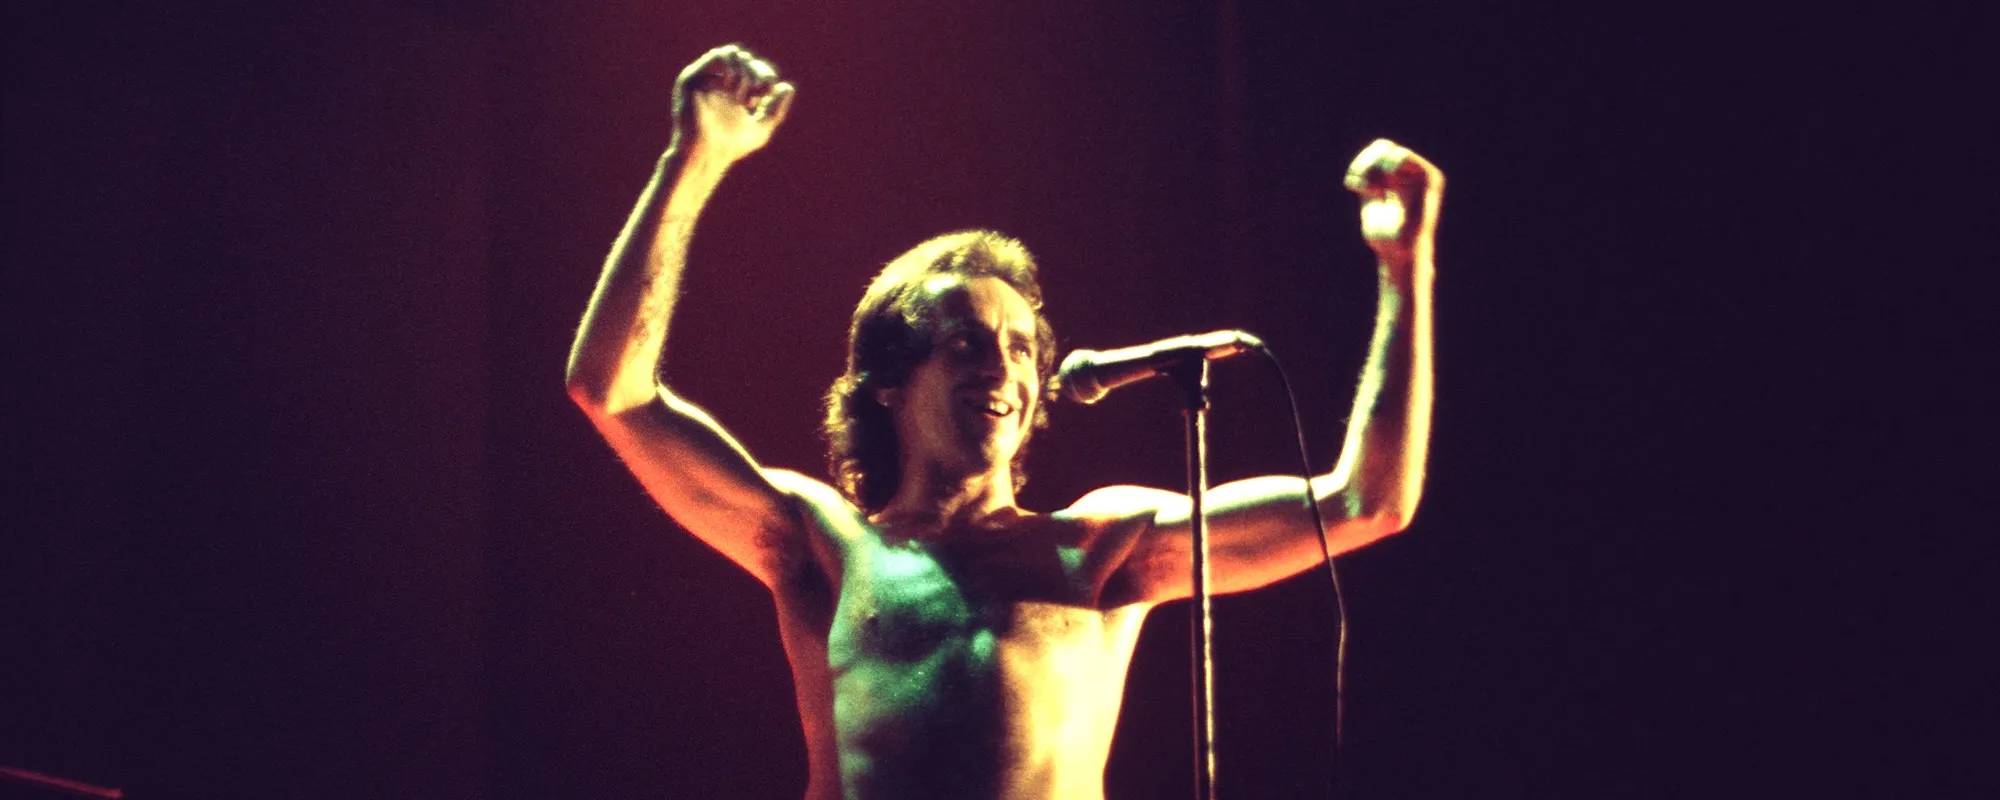 AMERICAN SONGWRITER: Bon Scott Estate Celebrates Late AC/DC Frontman’s 78th Birthday with Tribute Concert, New Merchandise